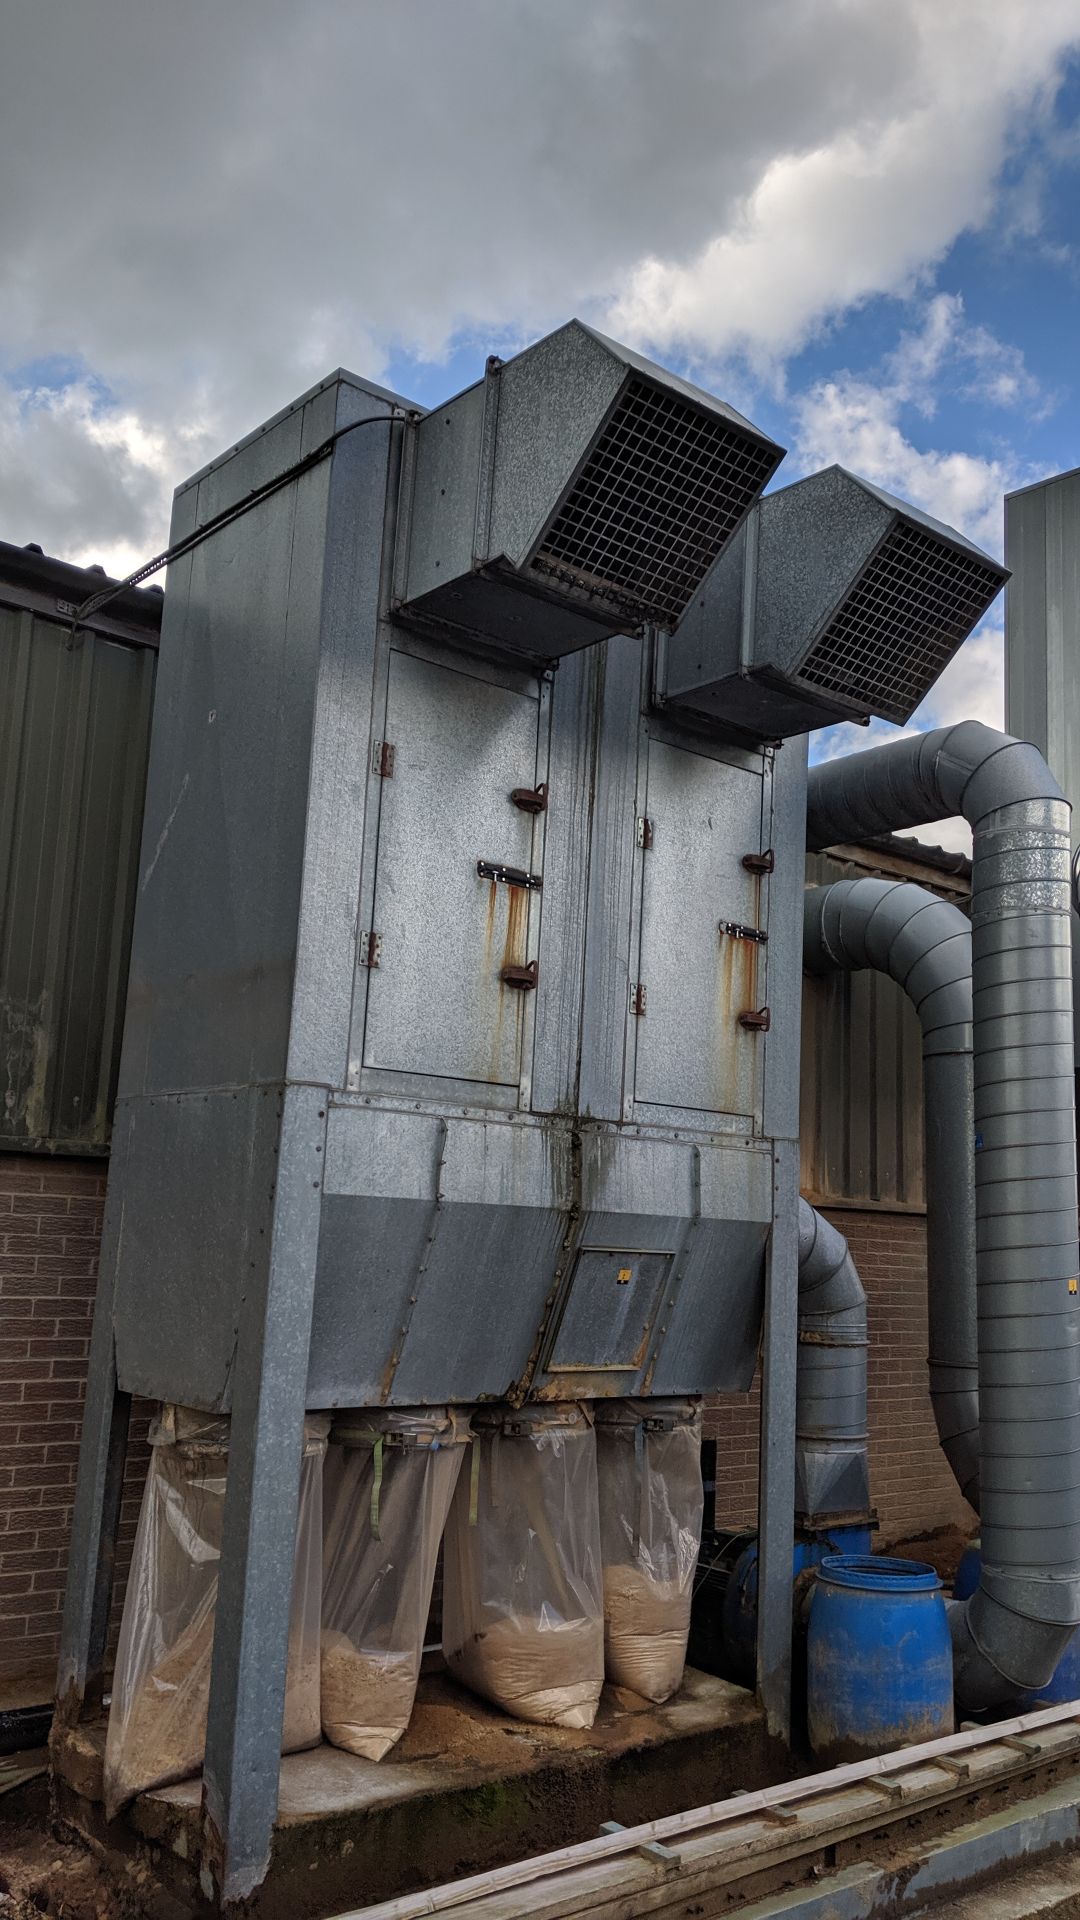 2 off large external dust extractors including ducting attached to each unit, running throughout the - Image 27 of 44